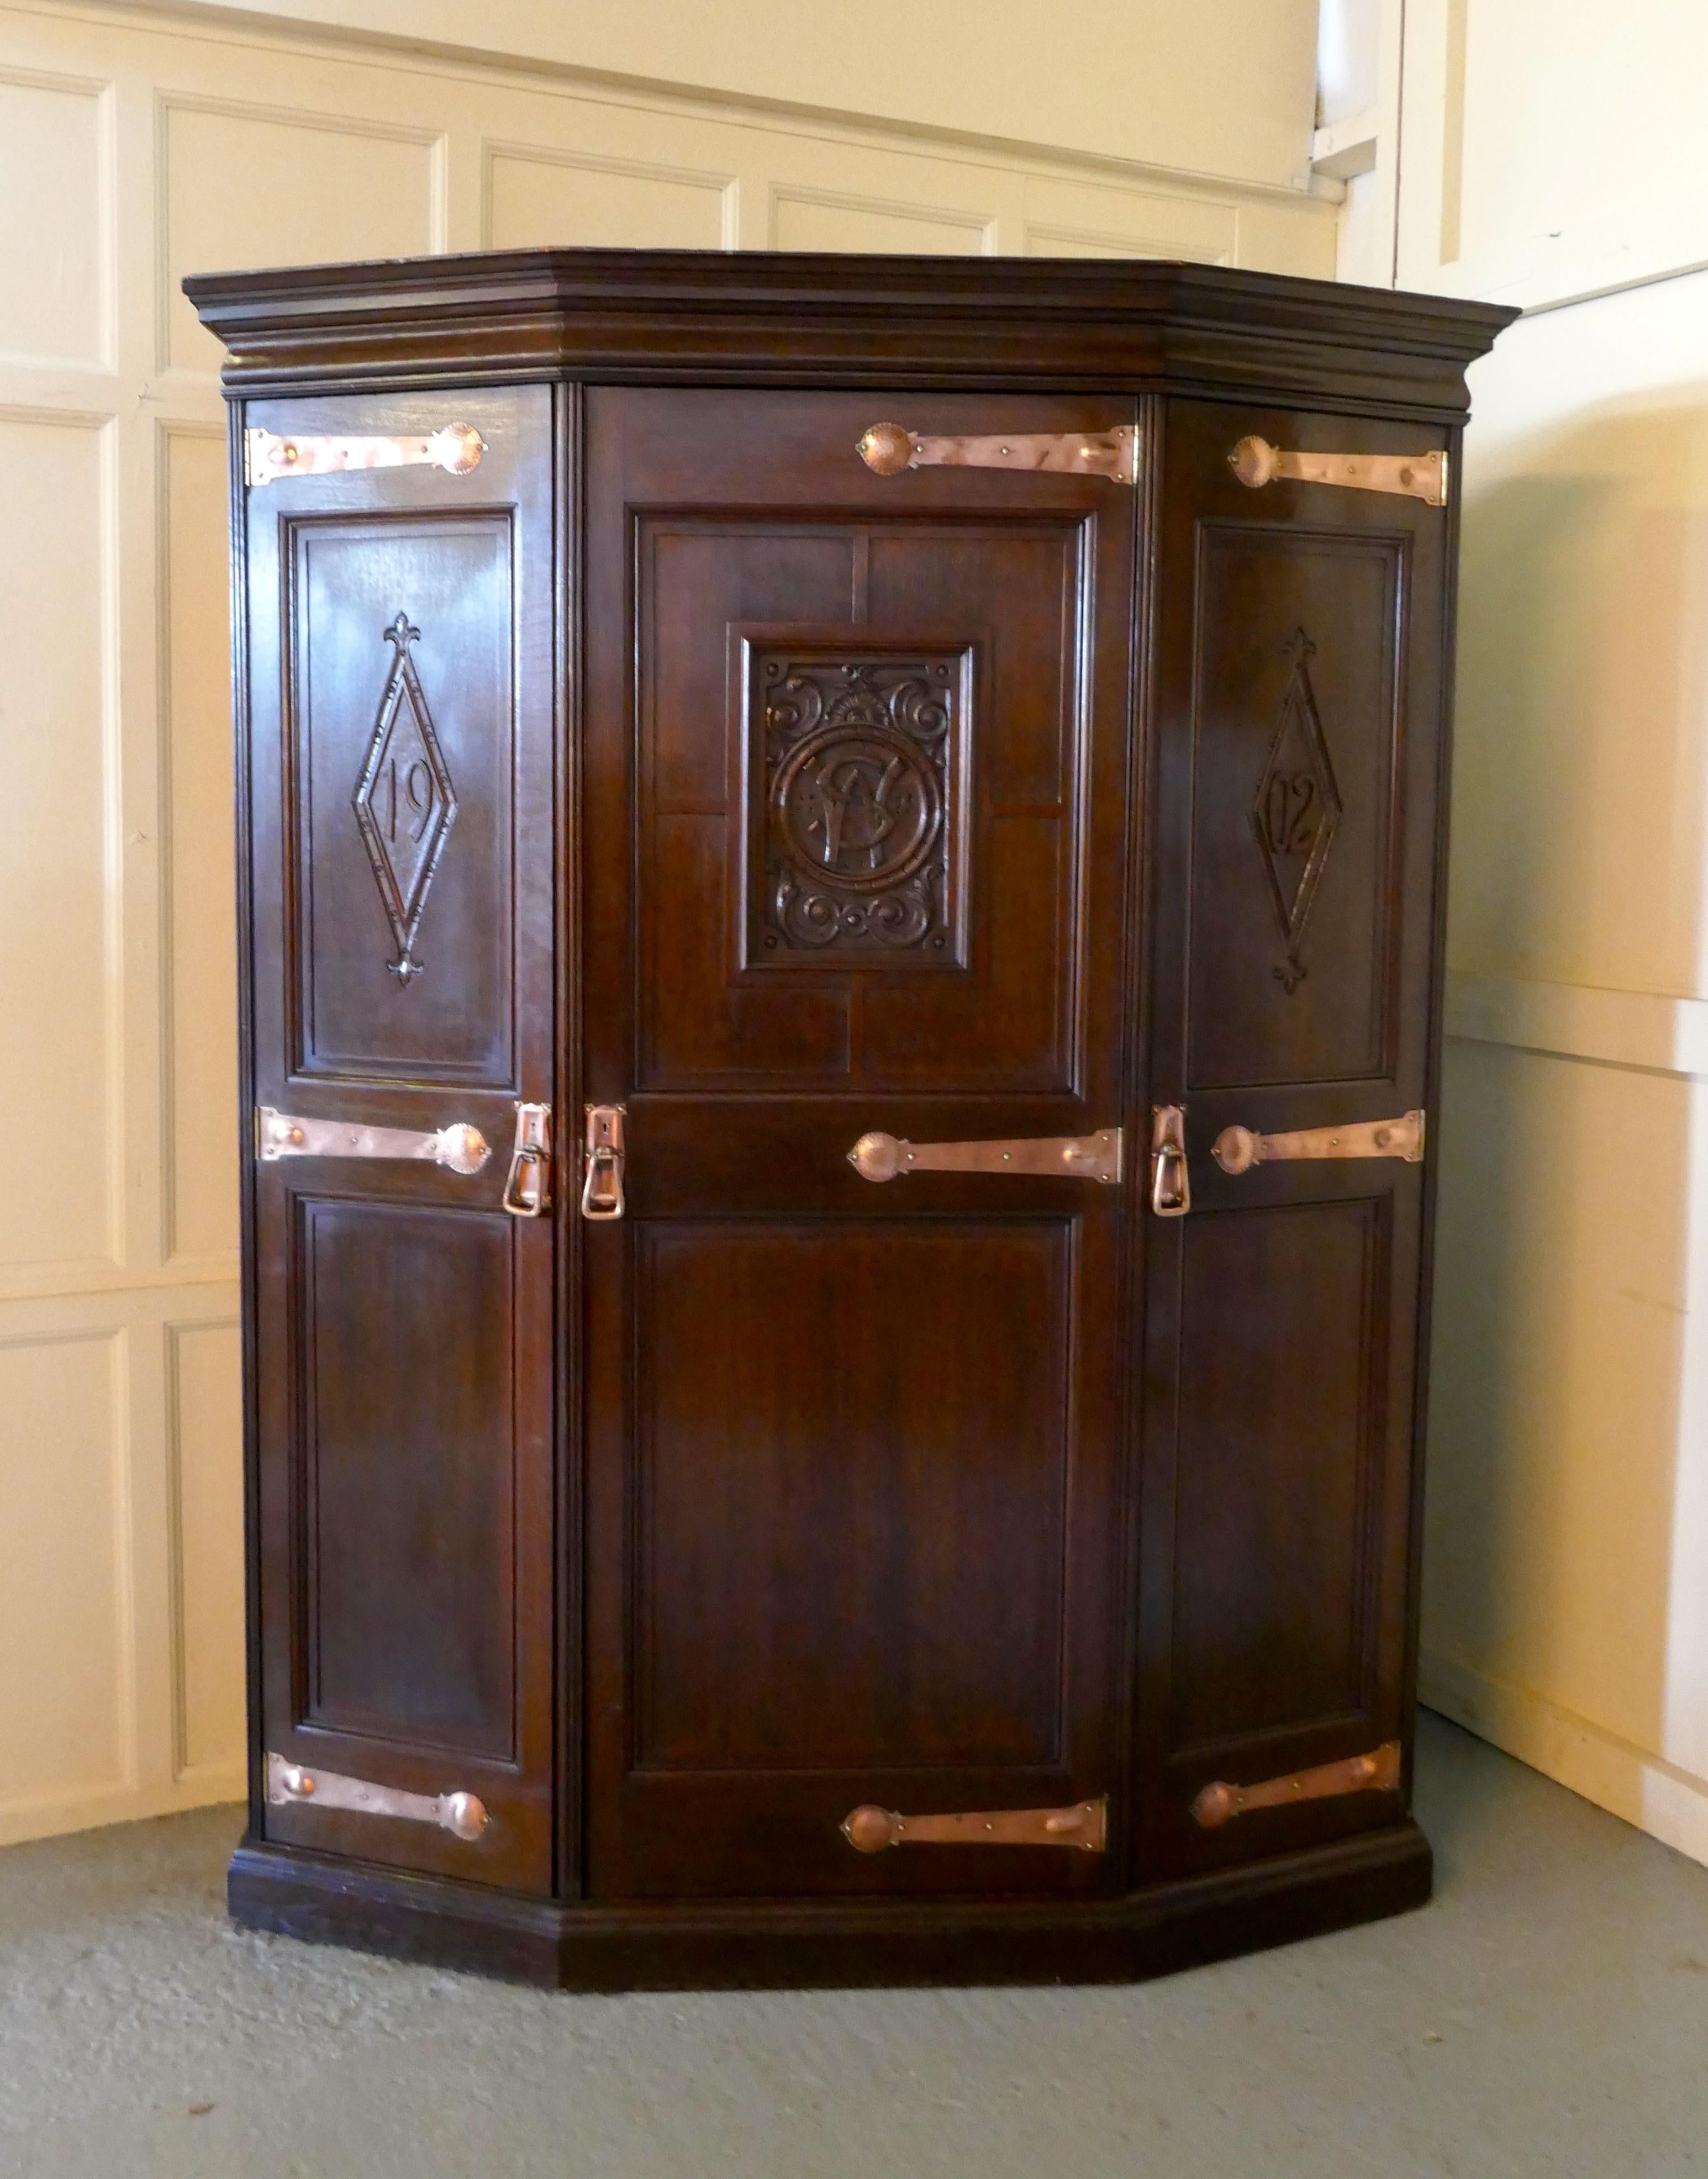 Early 20th Century Rare Piece of Progressive Arts & Crafts Furniture, Made by Gillow for Liberty